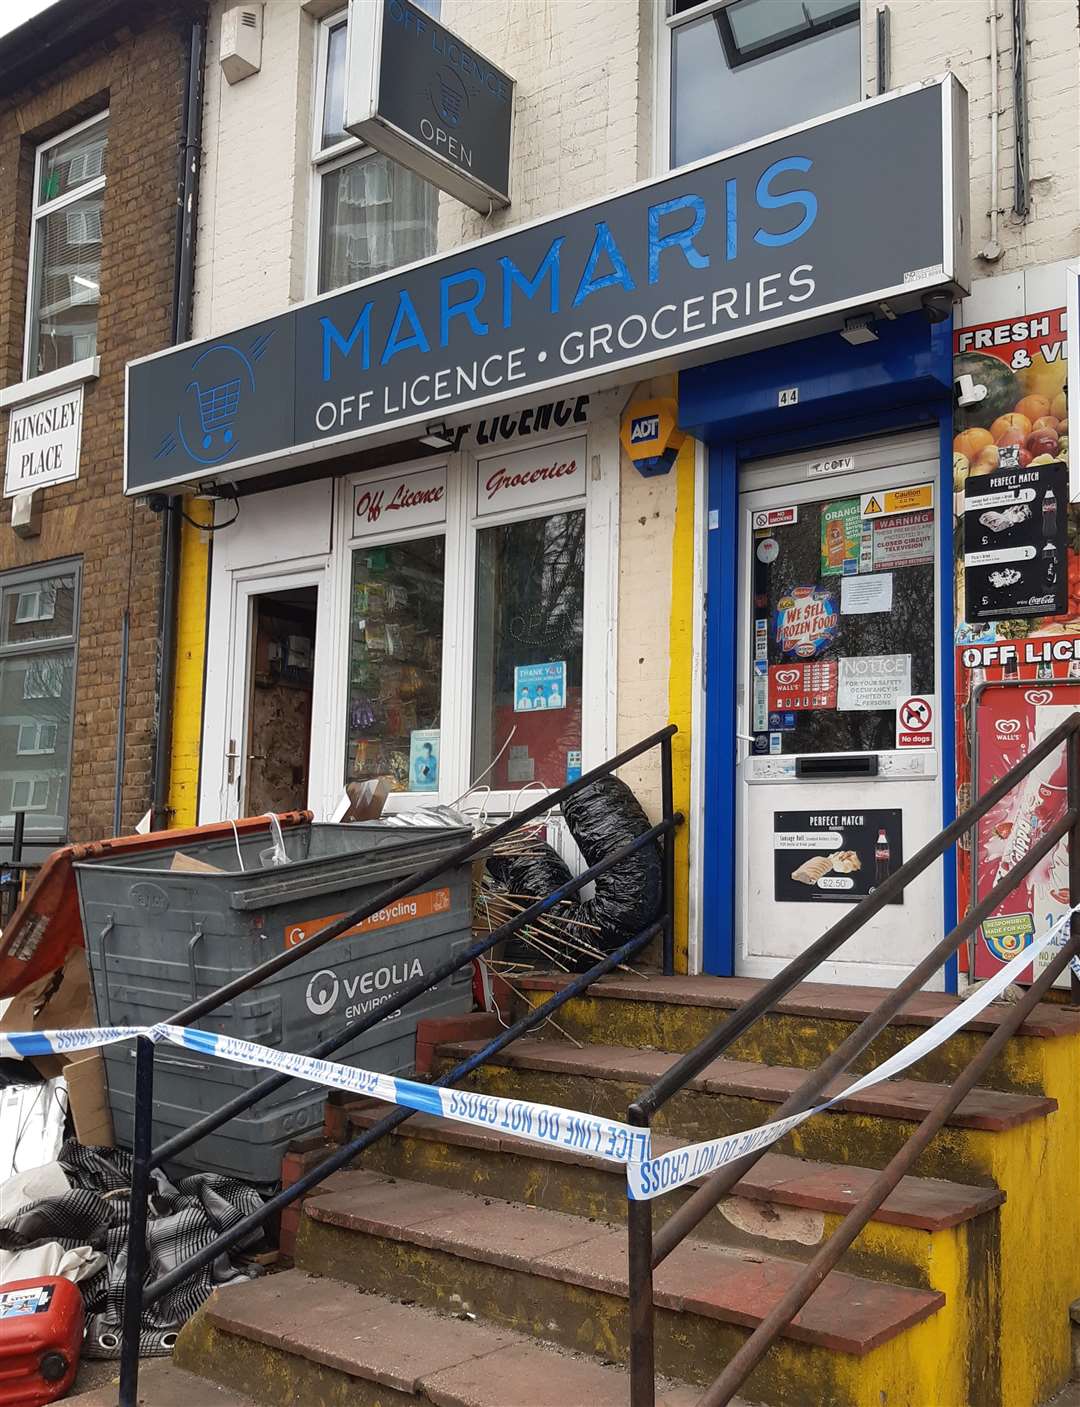 The Marmaris store in Mote Road after the blaze. Cannabis plants were found in the flat above